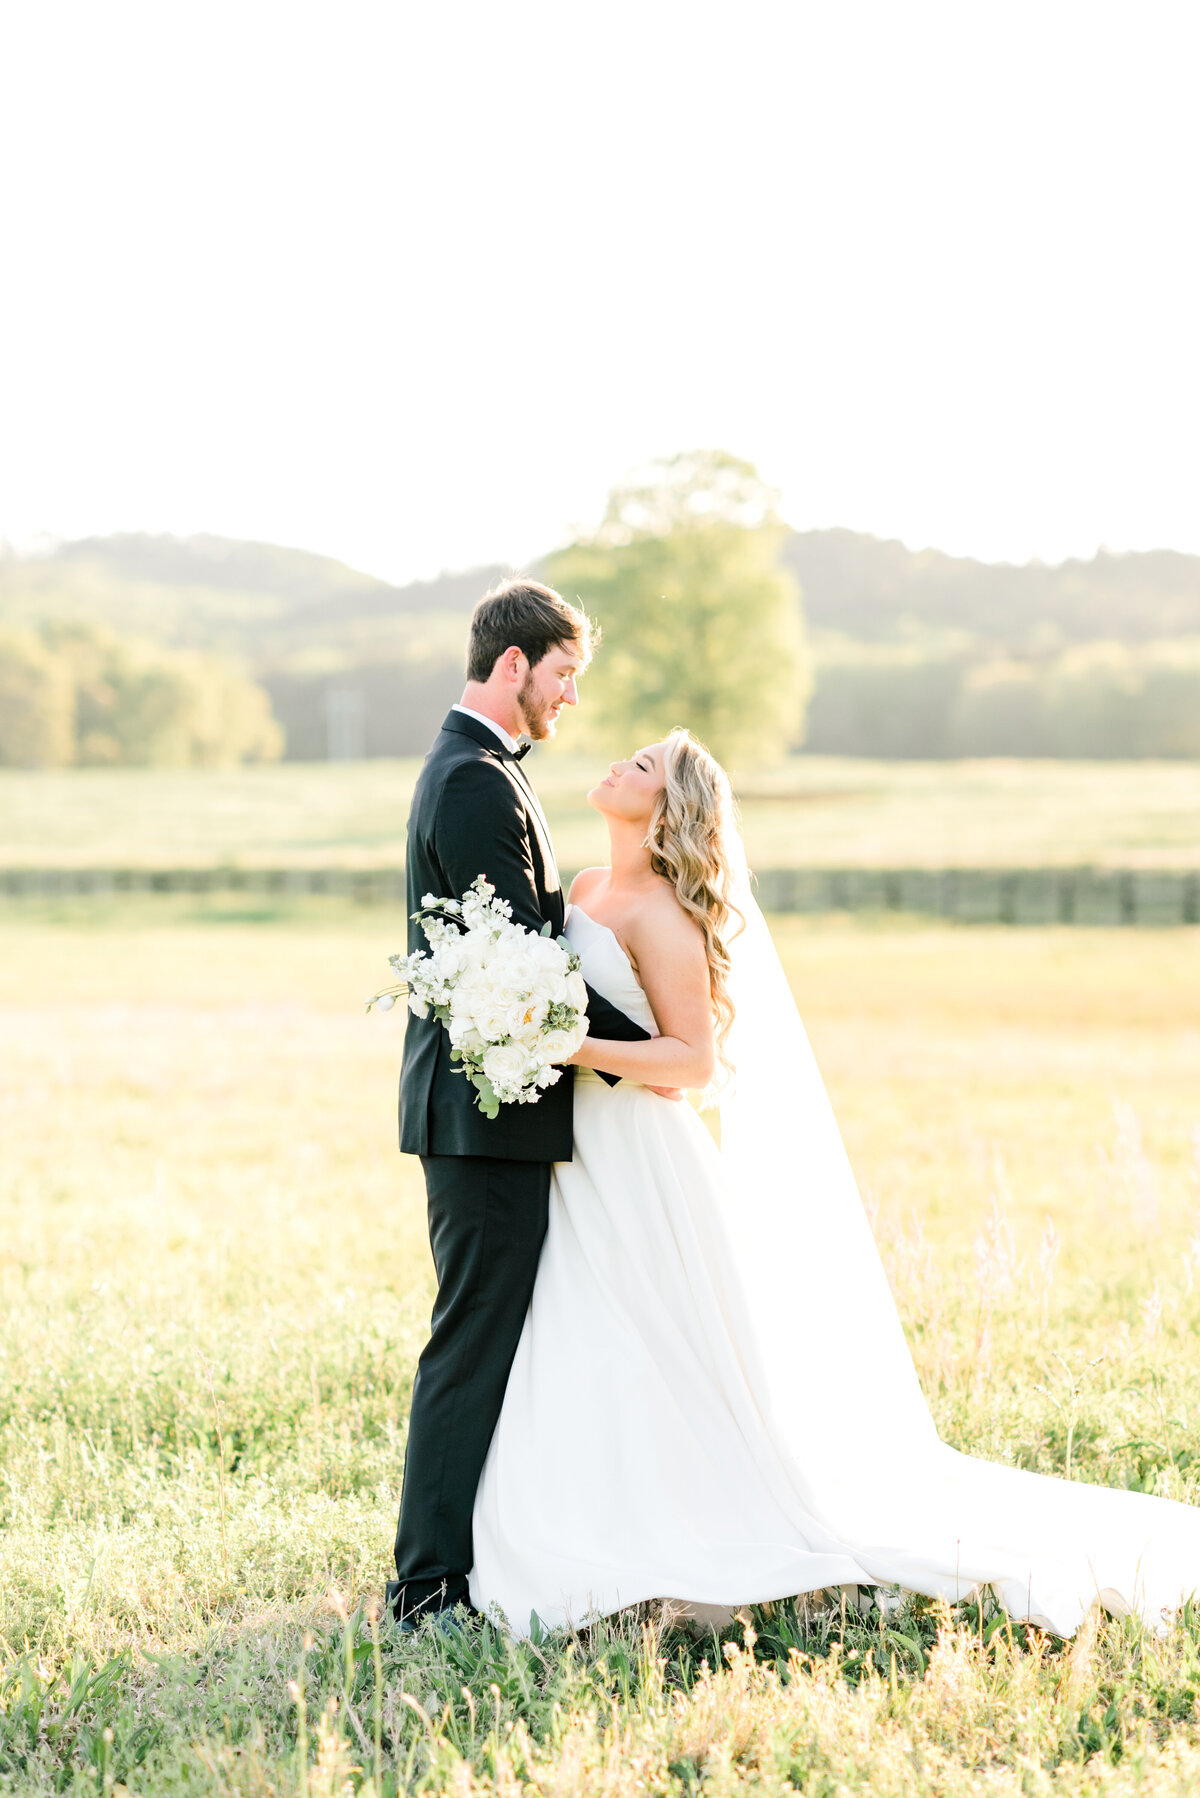 Pursell Farms - Emily McIntyre Photography-111